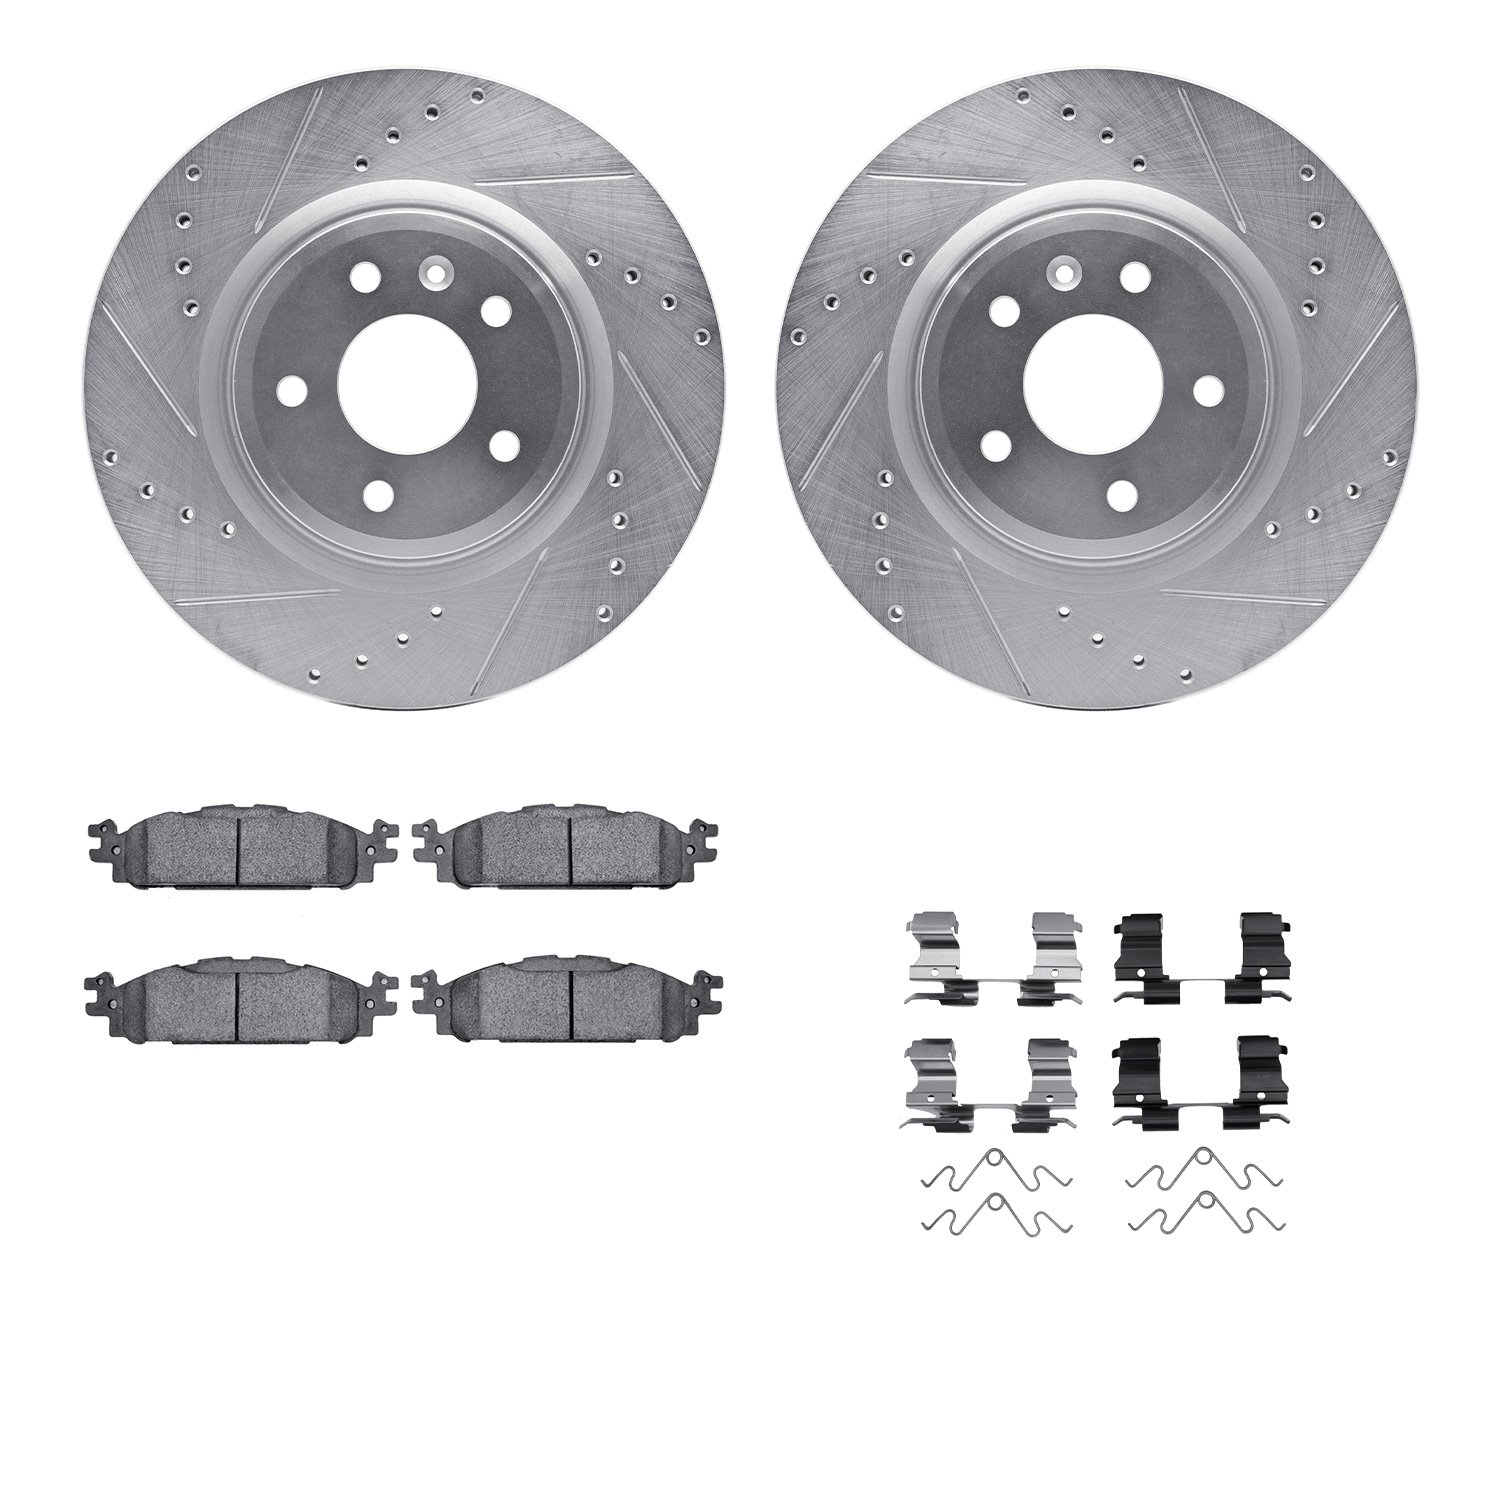 7212-54002 Drilled/Slotted Rotors w/Heavy-Duty Brake Pads Kit & Hardware [Silver], 2009-2010 Ford/Lincoln/Mercury/Mazda, Positio